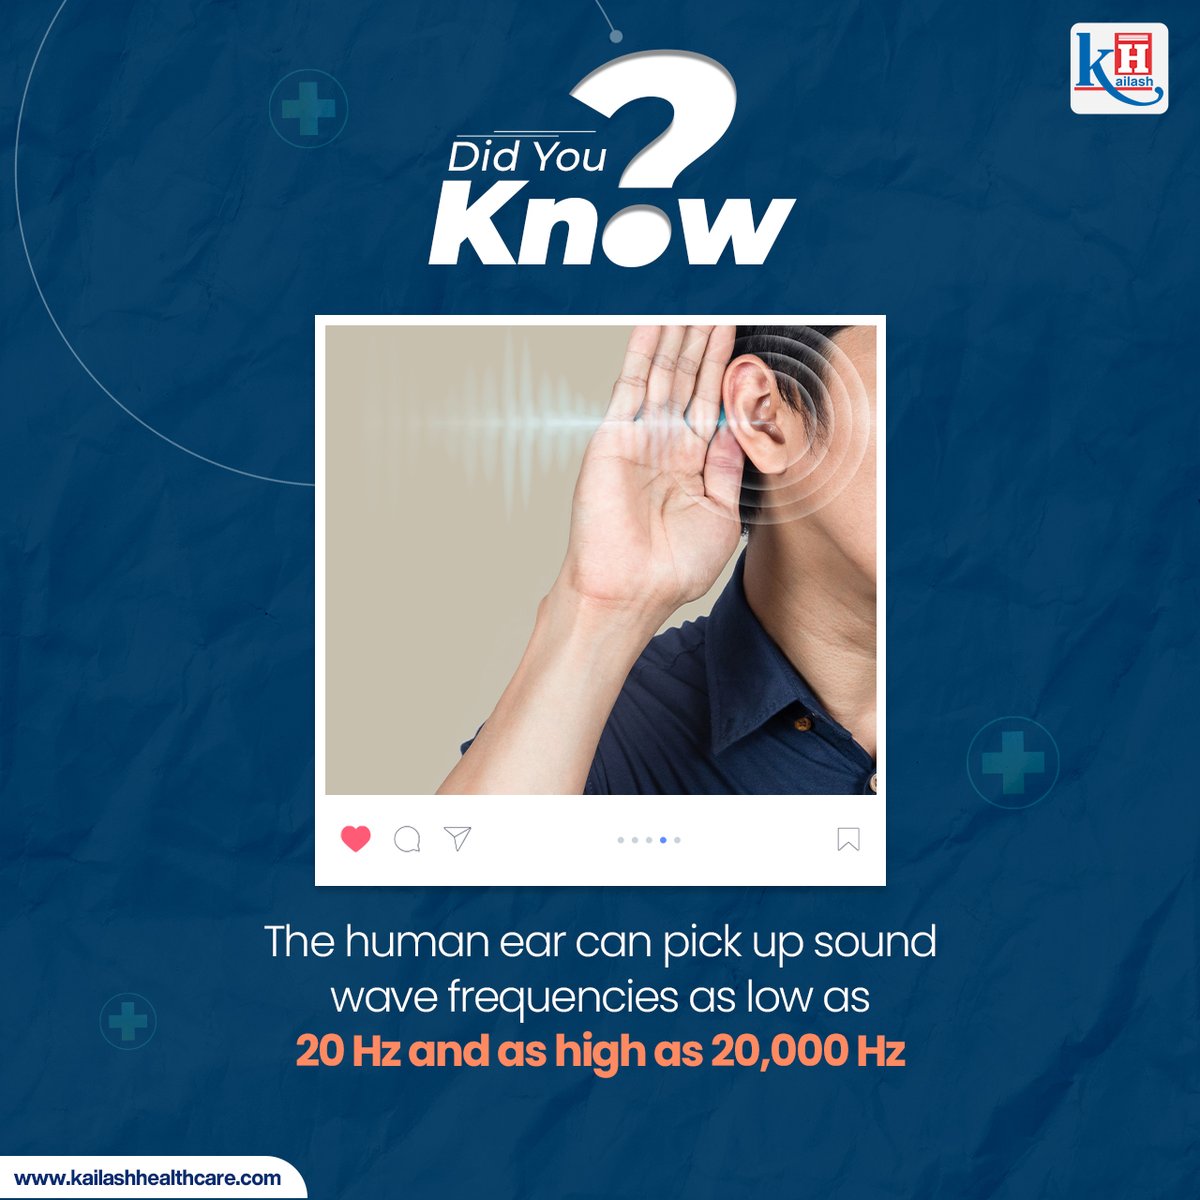 #DidYouKnow? The human ear can hear sounds between a mosquito's whine (20 kHz) & a low rumble (20 Hz). Pretty impressive! #facts #healthfacts #humanear #soundwaves #science